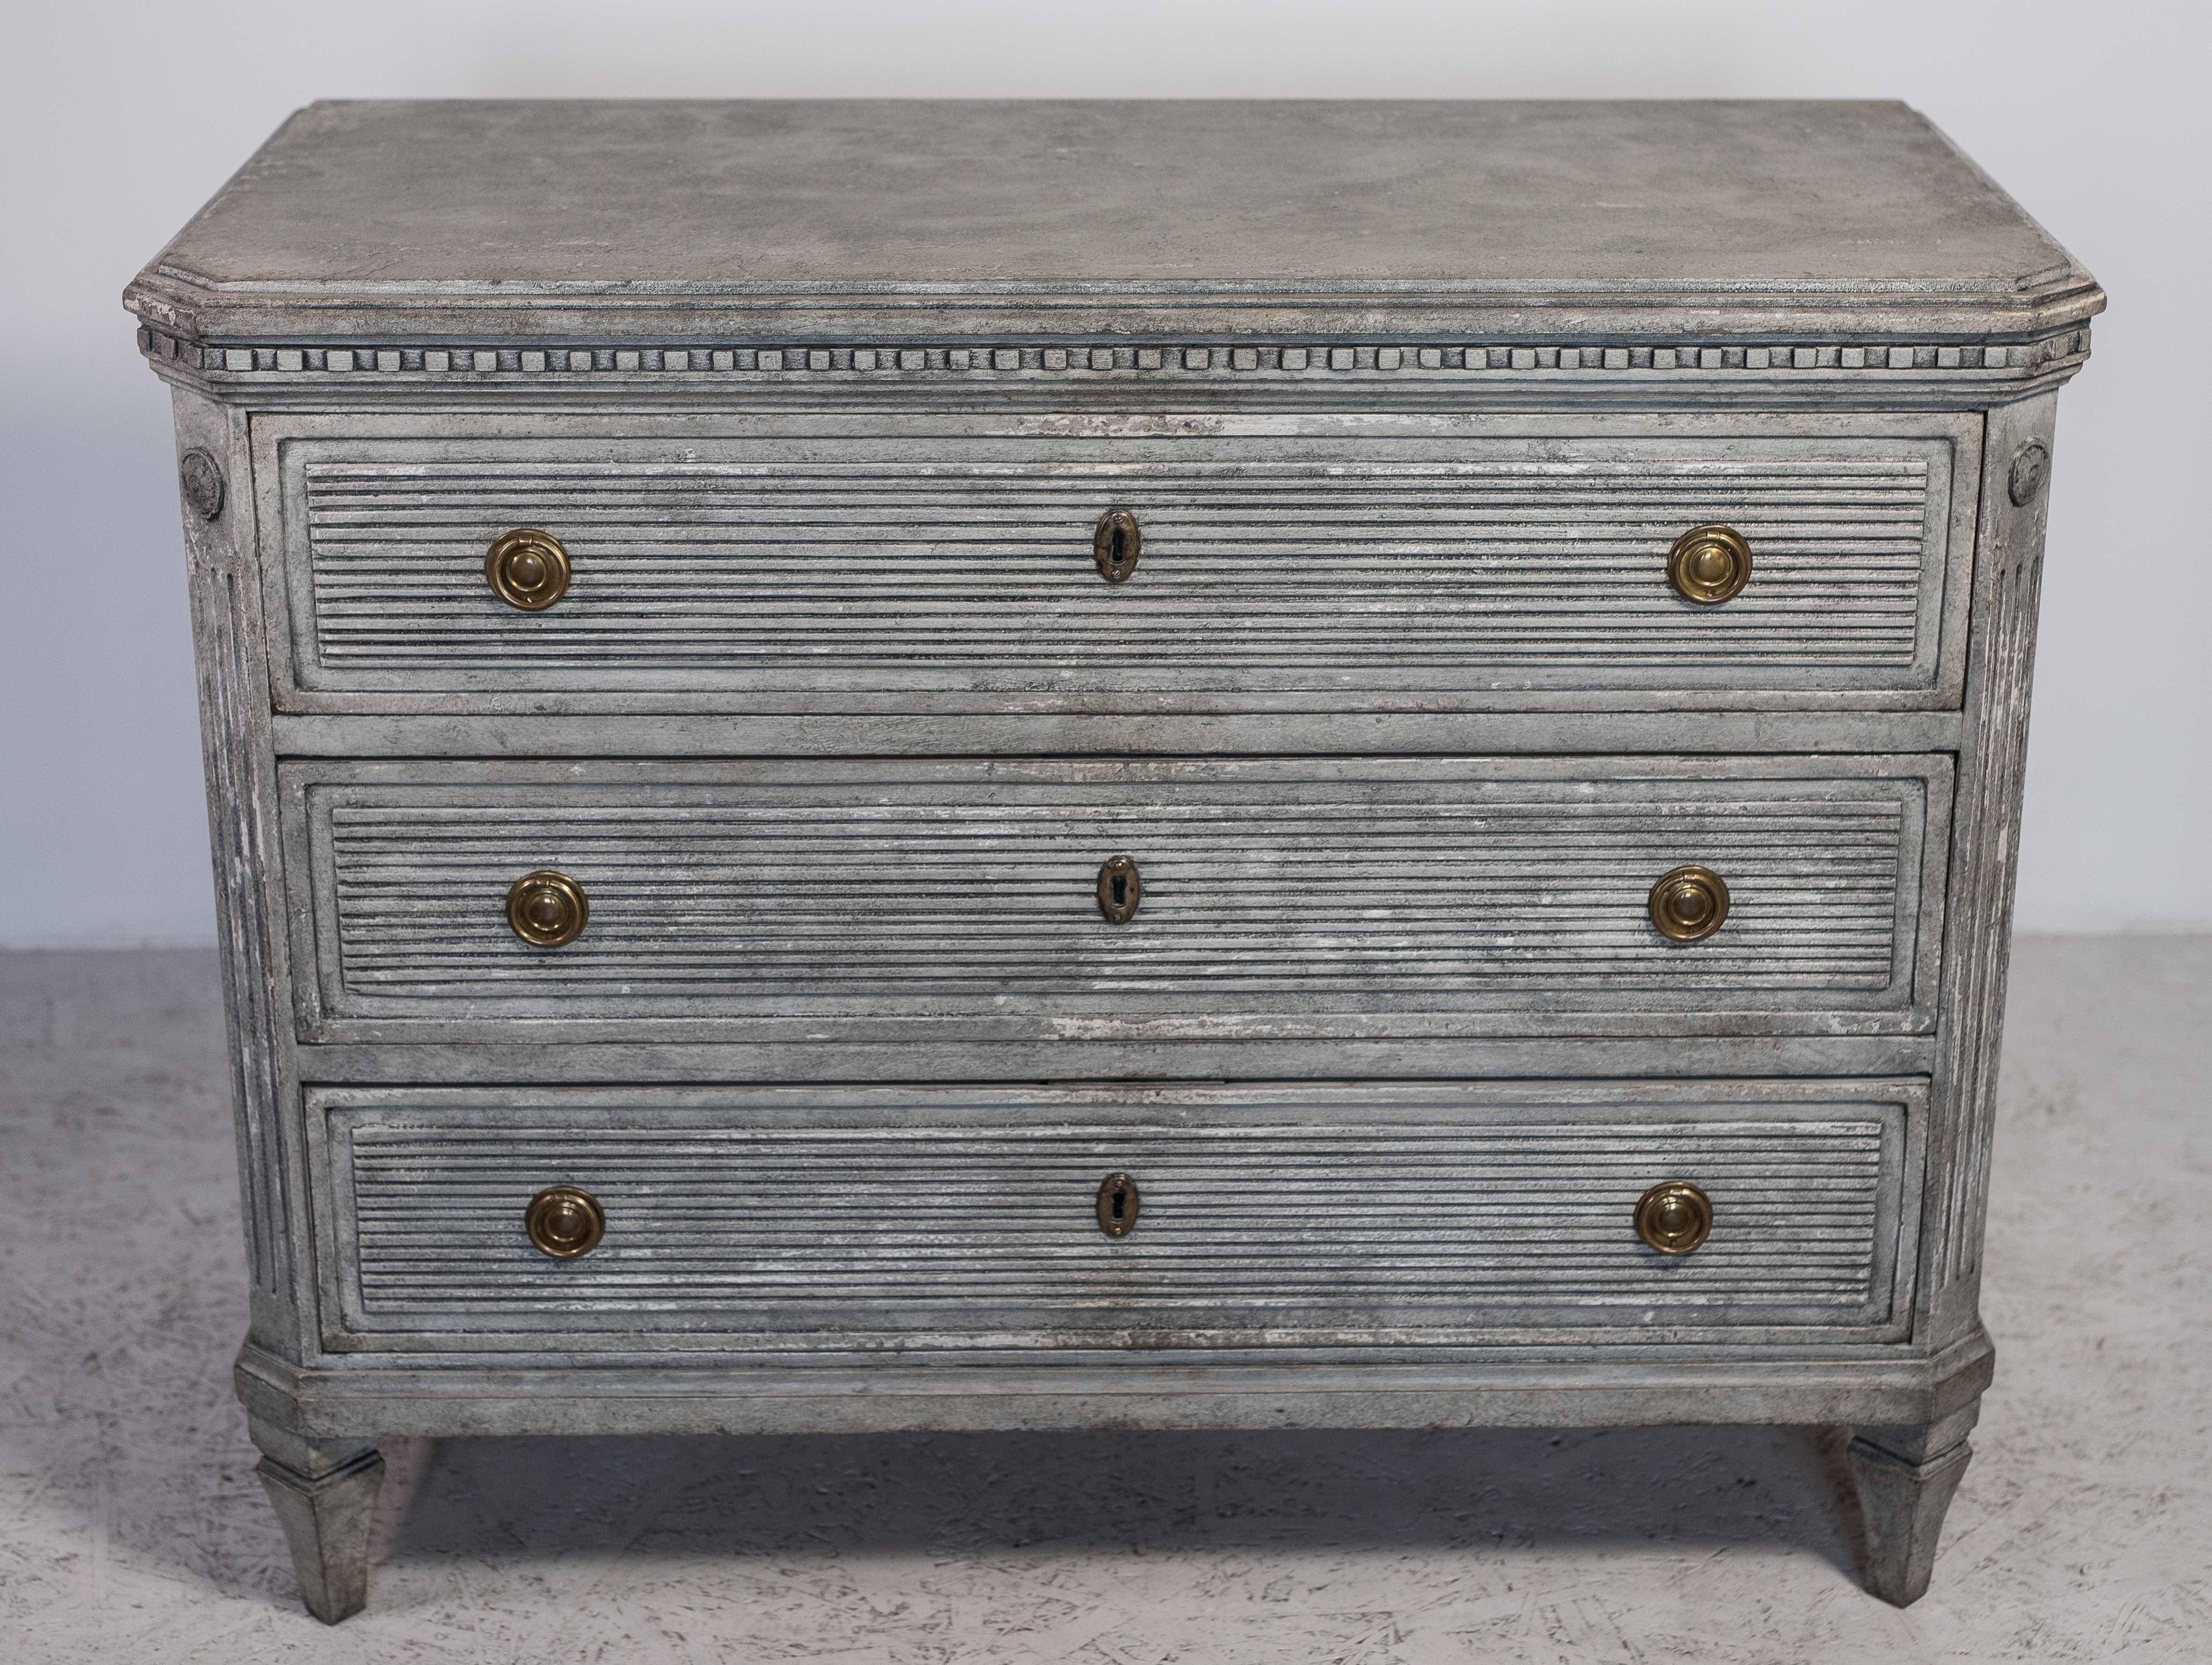 Hand-Painted Swedish Gustavian Painted Chest of Drawers Commode Tallboy 1850 Grey White